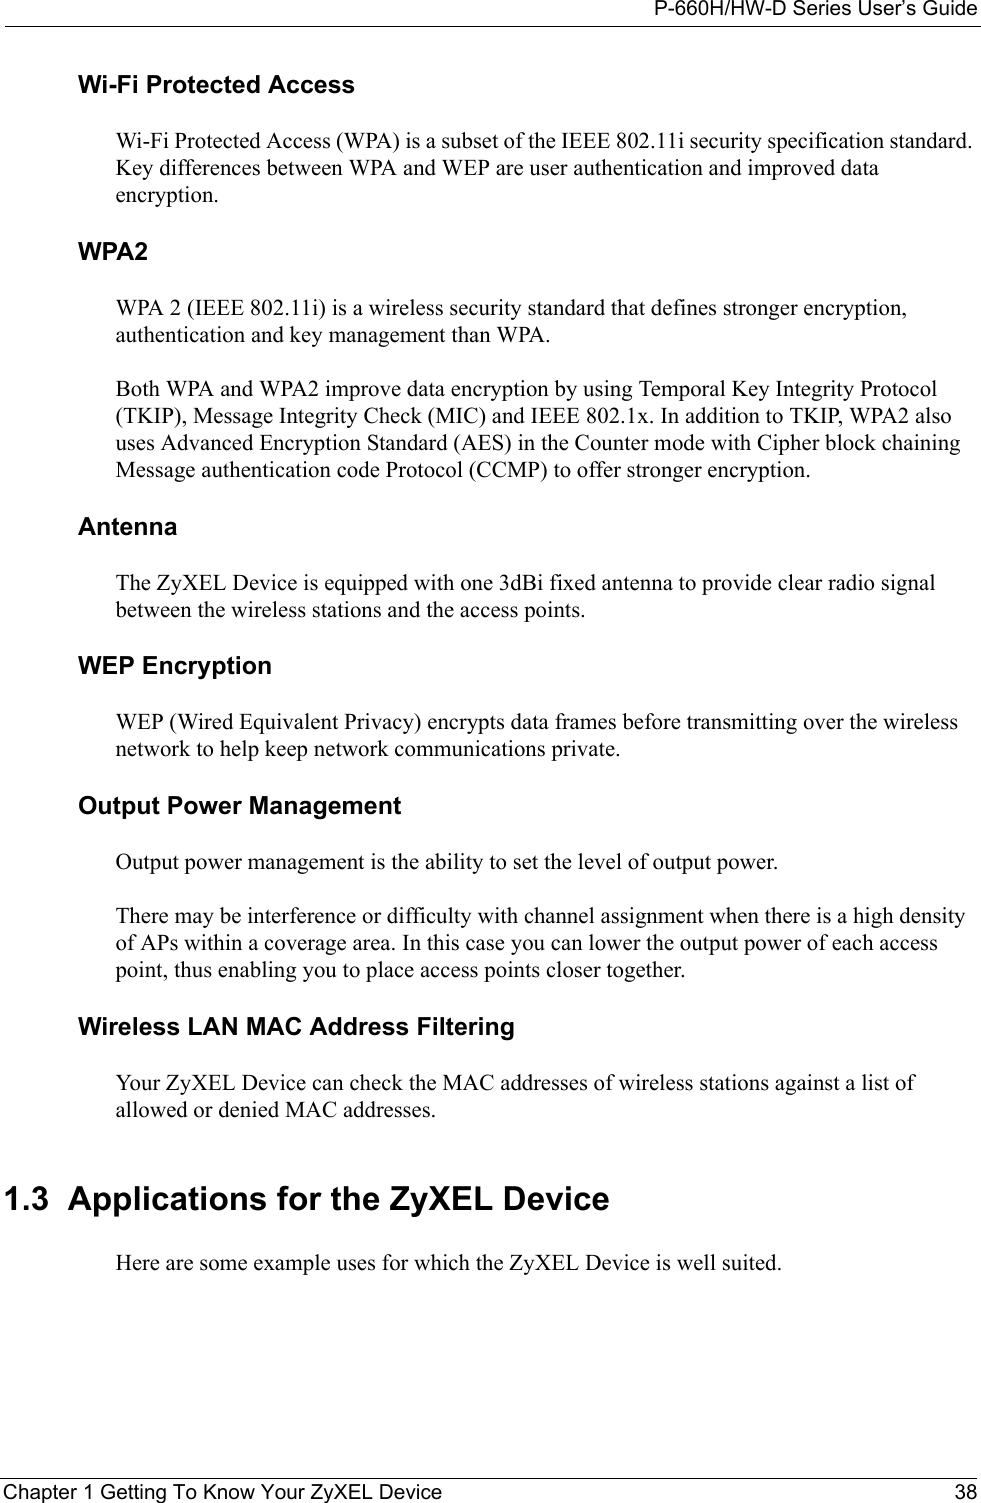 P-660H/HW-D Series User’s GuideChapter 1 Getting To Know Your ZyXEL Device 38Wi-Fi Protected AccessWi-Fi Protected Access (WPA) is a subset of the IEEE 802.11i security specification standard. Key differences between WPA and WEP are user authentication and improved data encryption.WPA2WPA 2 (IEEE 802.11i) is a wireless security standard that defines stronger encryption, authentication and key management than WPA.Both WPA and WPA2 improve data encryption by using Temporal Key Integrity Protocol (TKIP), Message Integrity Check (MIC) and IEEE 802.1x. In addition to TKIP, WPA2 also uses Advanced Encryption Standard (AES) in the Counter mode with Cipher block chaining Message authentication code Protocol (CCMP) to offer stronger encryption.Antenna The ZyXEL Device is equipped with one 3dBi fixed antenna to provide clear radio signal between the wireless stations and the access points. WEP EncryptionWEP (Wired Equivalent Privacy) encrypts data frames before transmitting over the wireless network to help keep network communications private.Output Power ManagementOutput power management is the ability to set the level of output power.There may be interference or difficulty with channel assignment when there is a high density of APs within a coverage area. In this case you can lower the output power of each access point, thus enabling you to place access points closer together.Wireless LAN MAC Address FilteringYour ZyXEL Device can check the MAC addresses of wireless stations against a list of allowed or denied MAC addresses.1.3  Applications for the ZyXEL DeviceHere are some example uses for which the ZyXEL Device is well suited. 